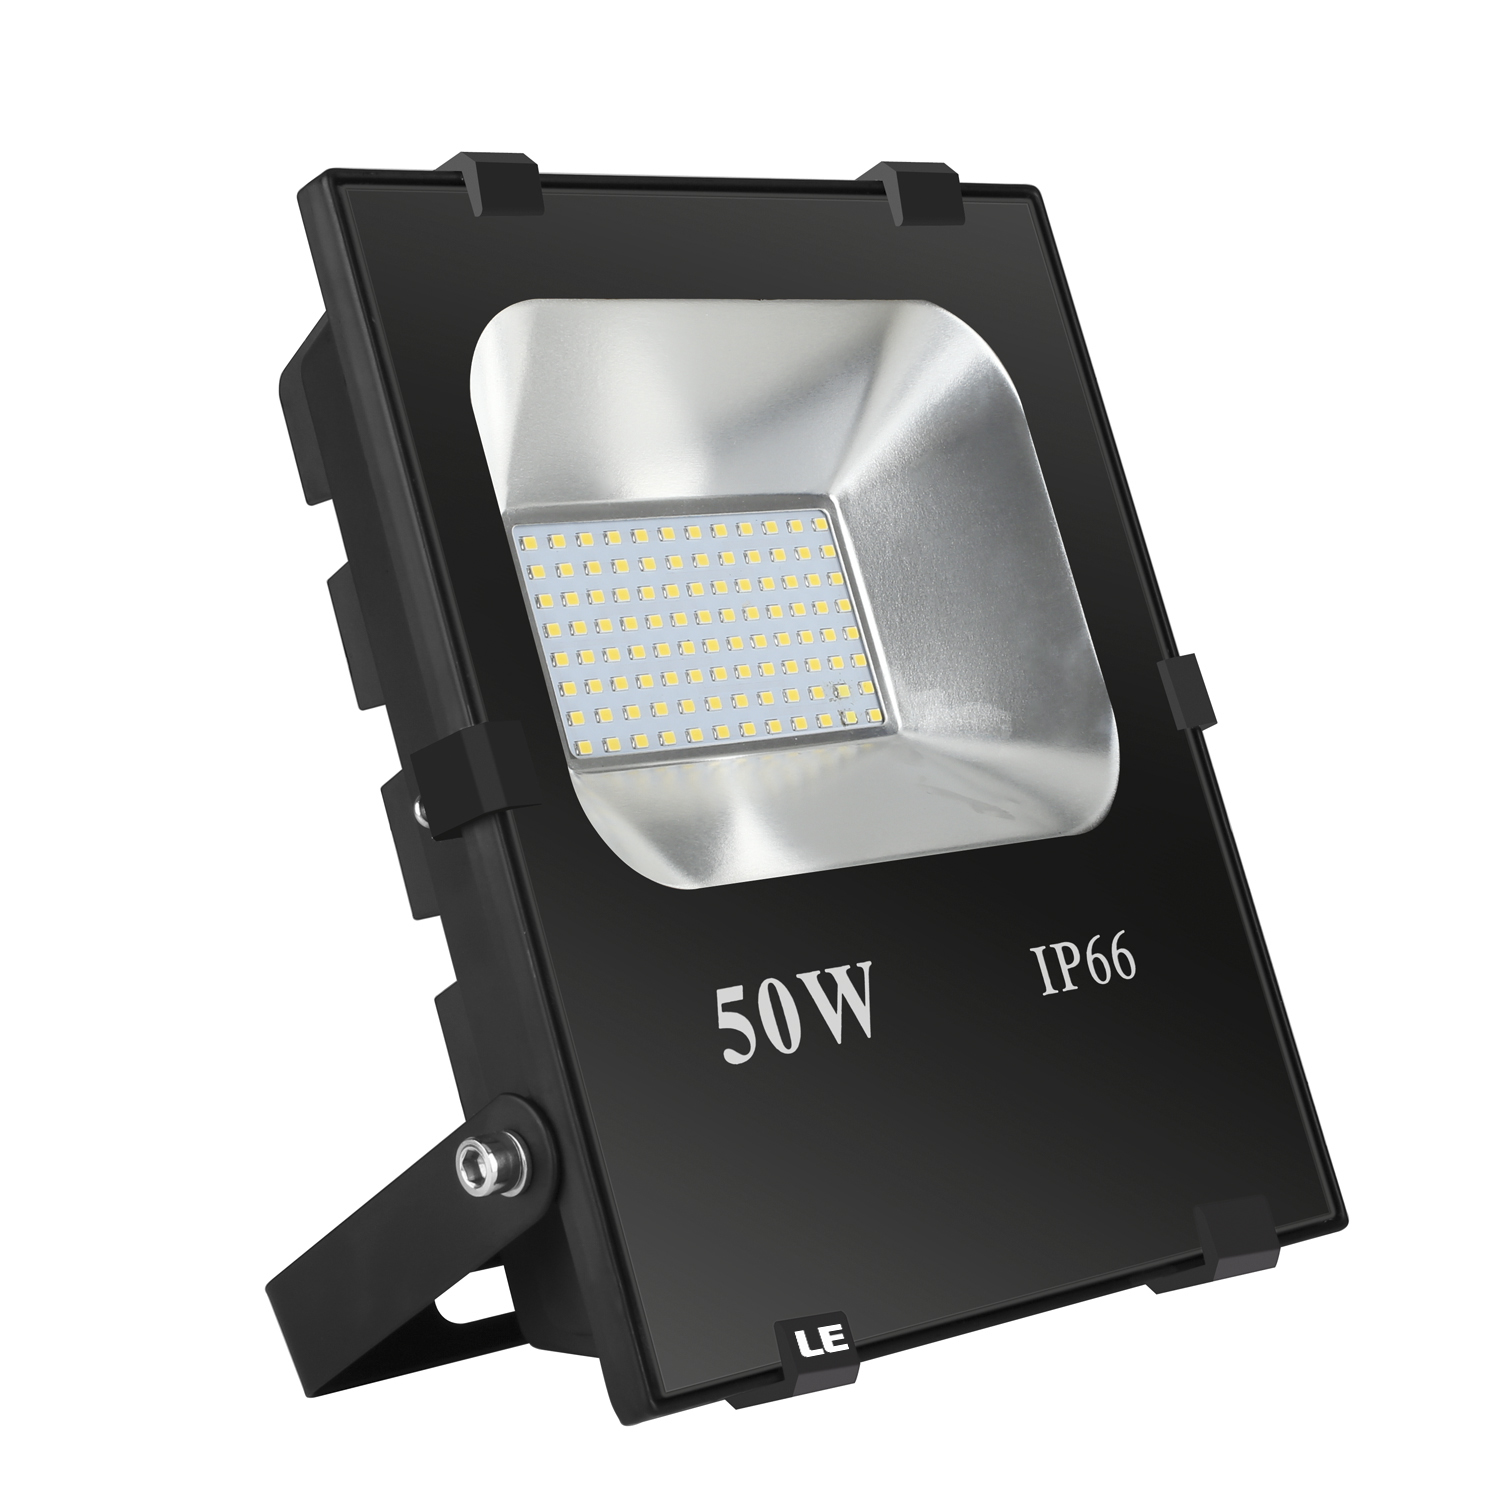 50W Outdoor LED Flood Lights - 5000lm - Daylight White |LE®